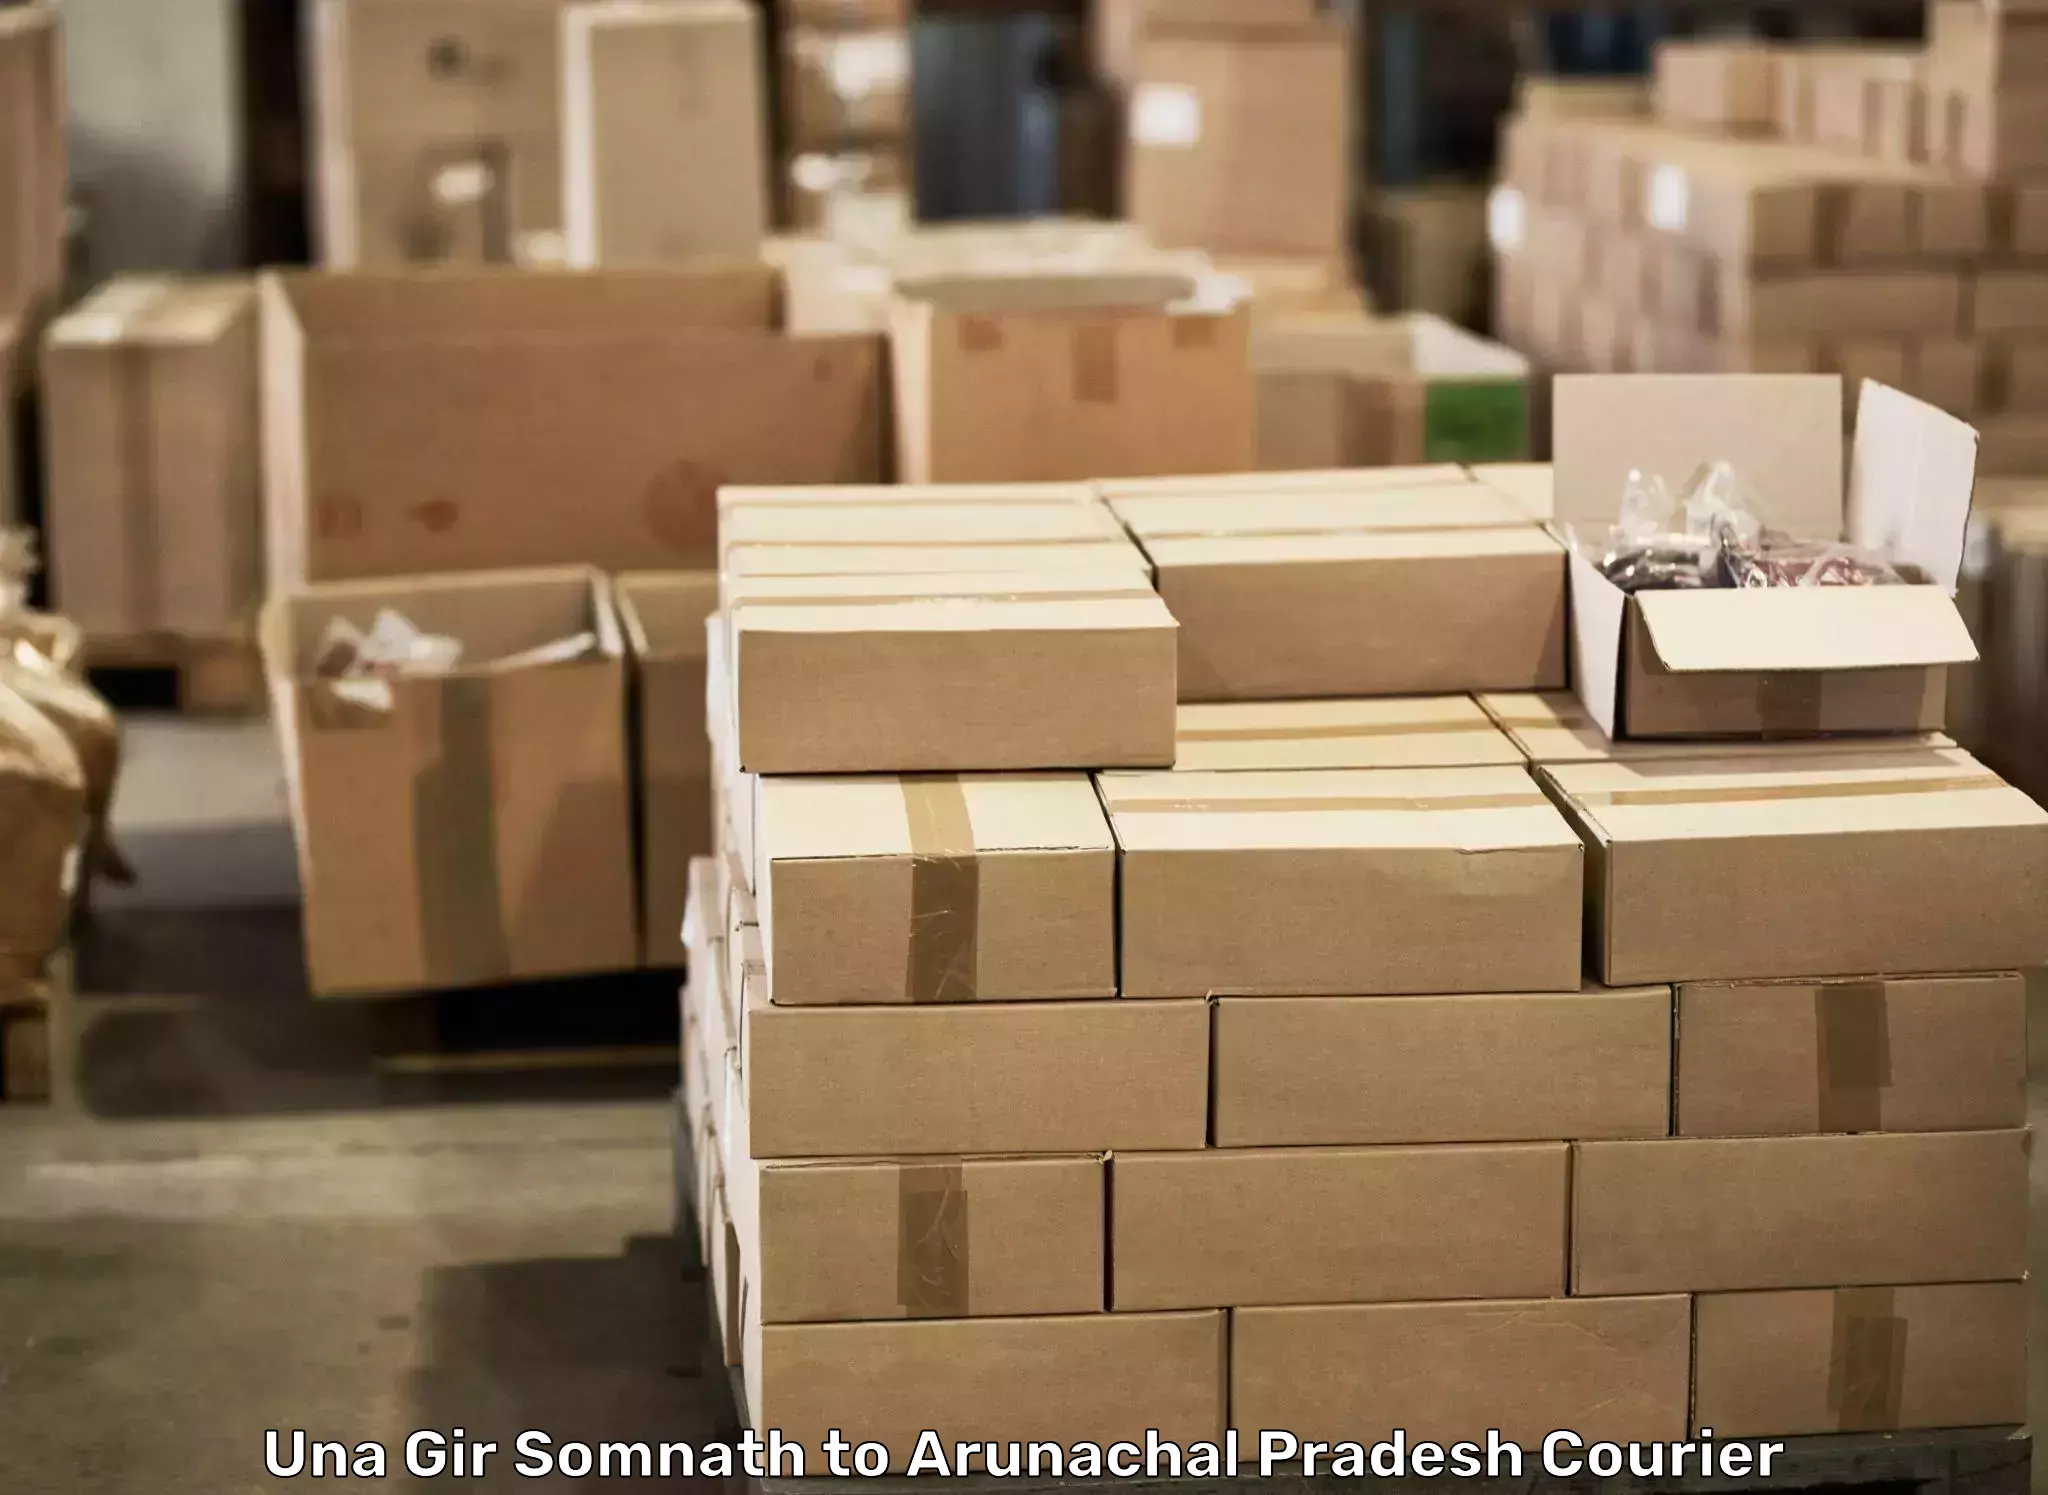 Professional packing services Una Gir Somnath to Nirjuli